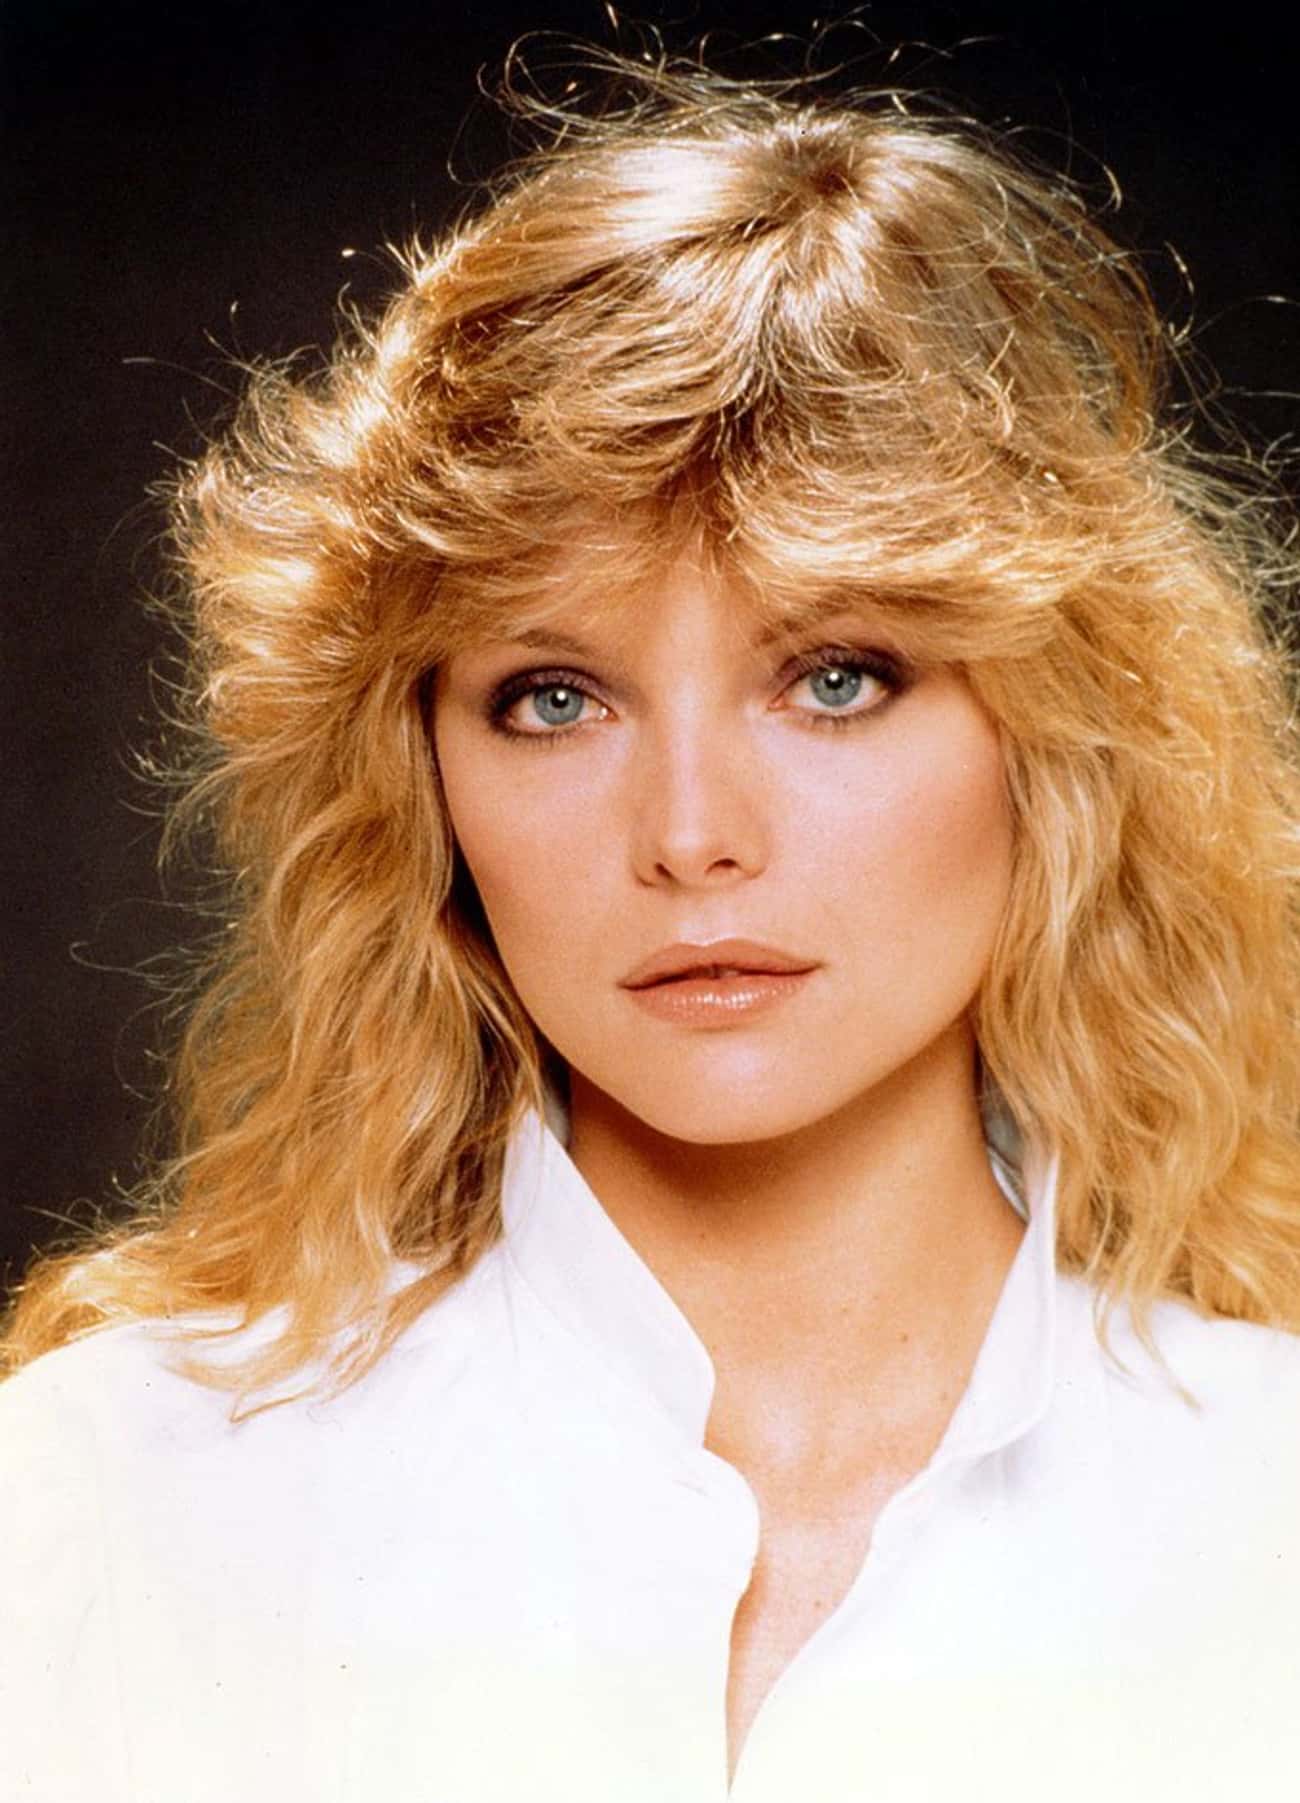 Young Michelle Pfeiffer in a White Buttondown Shirt